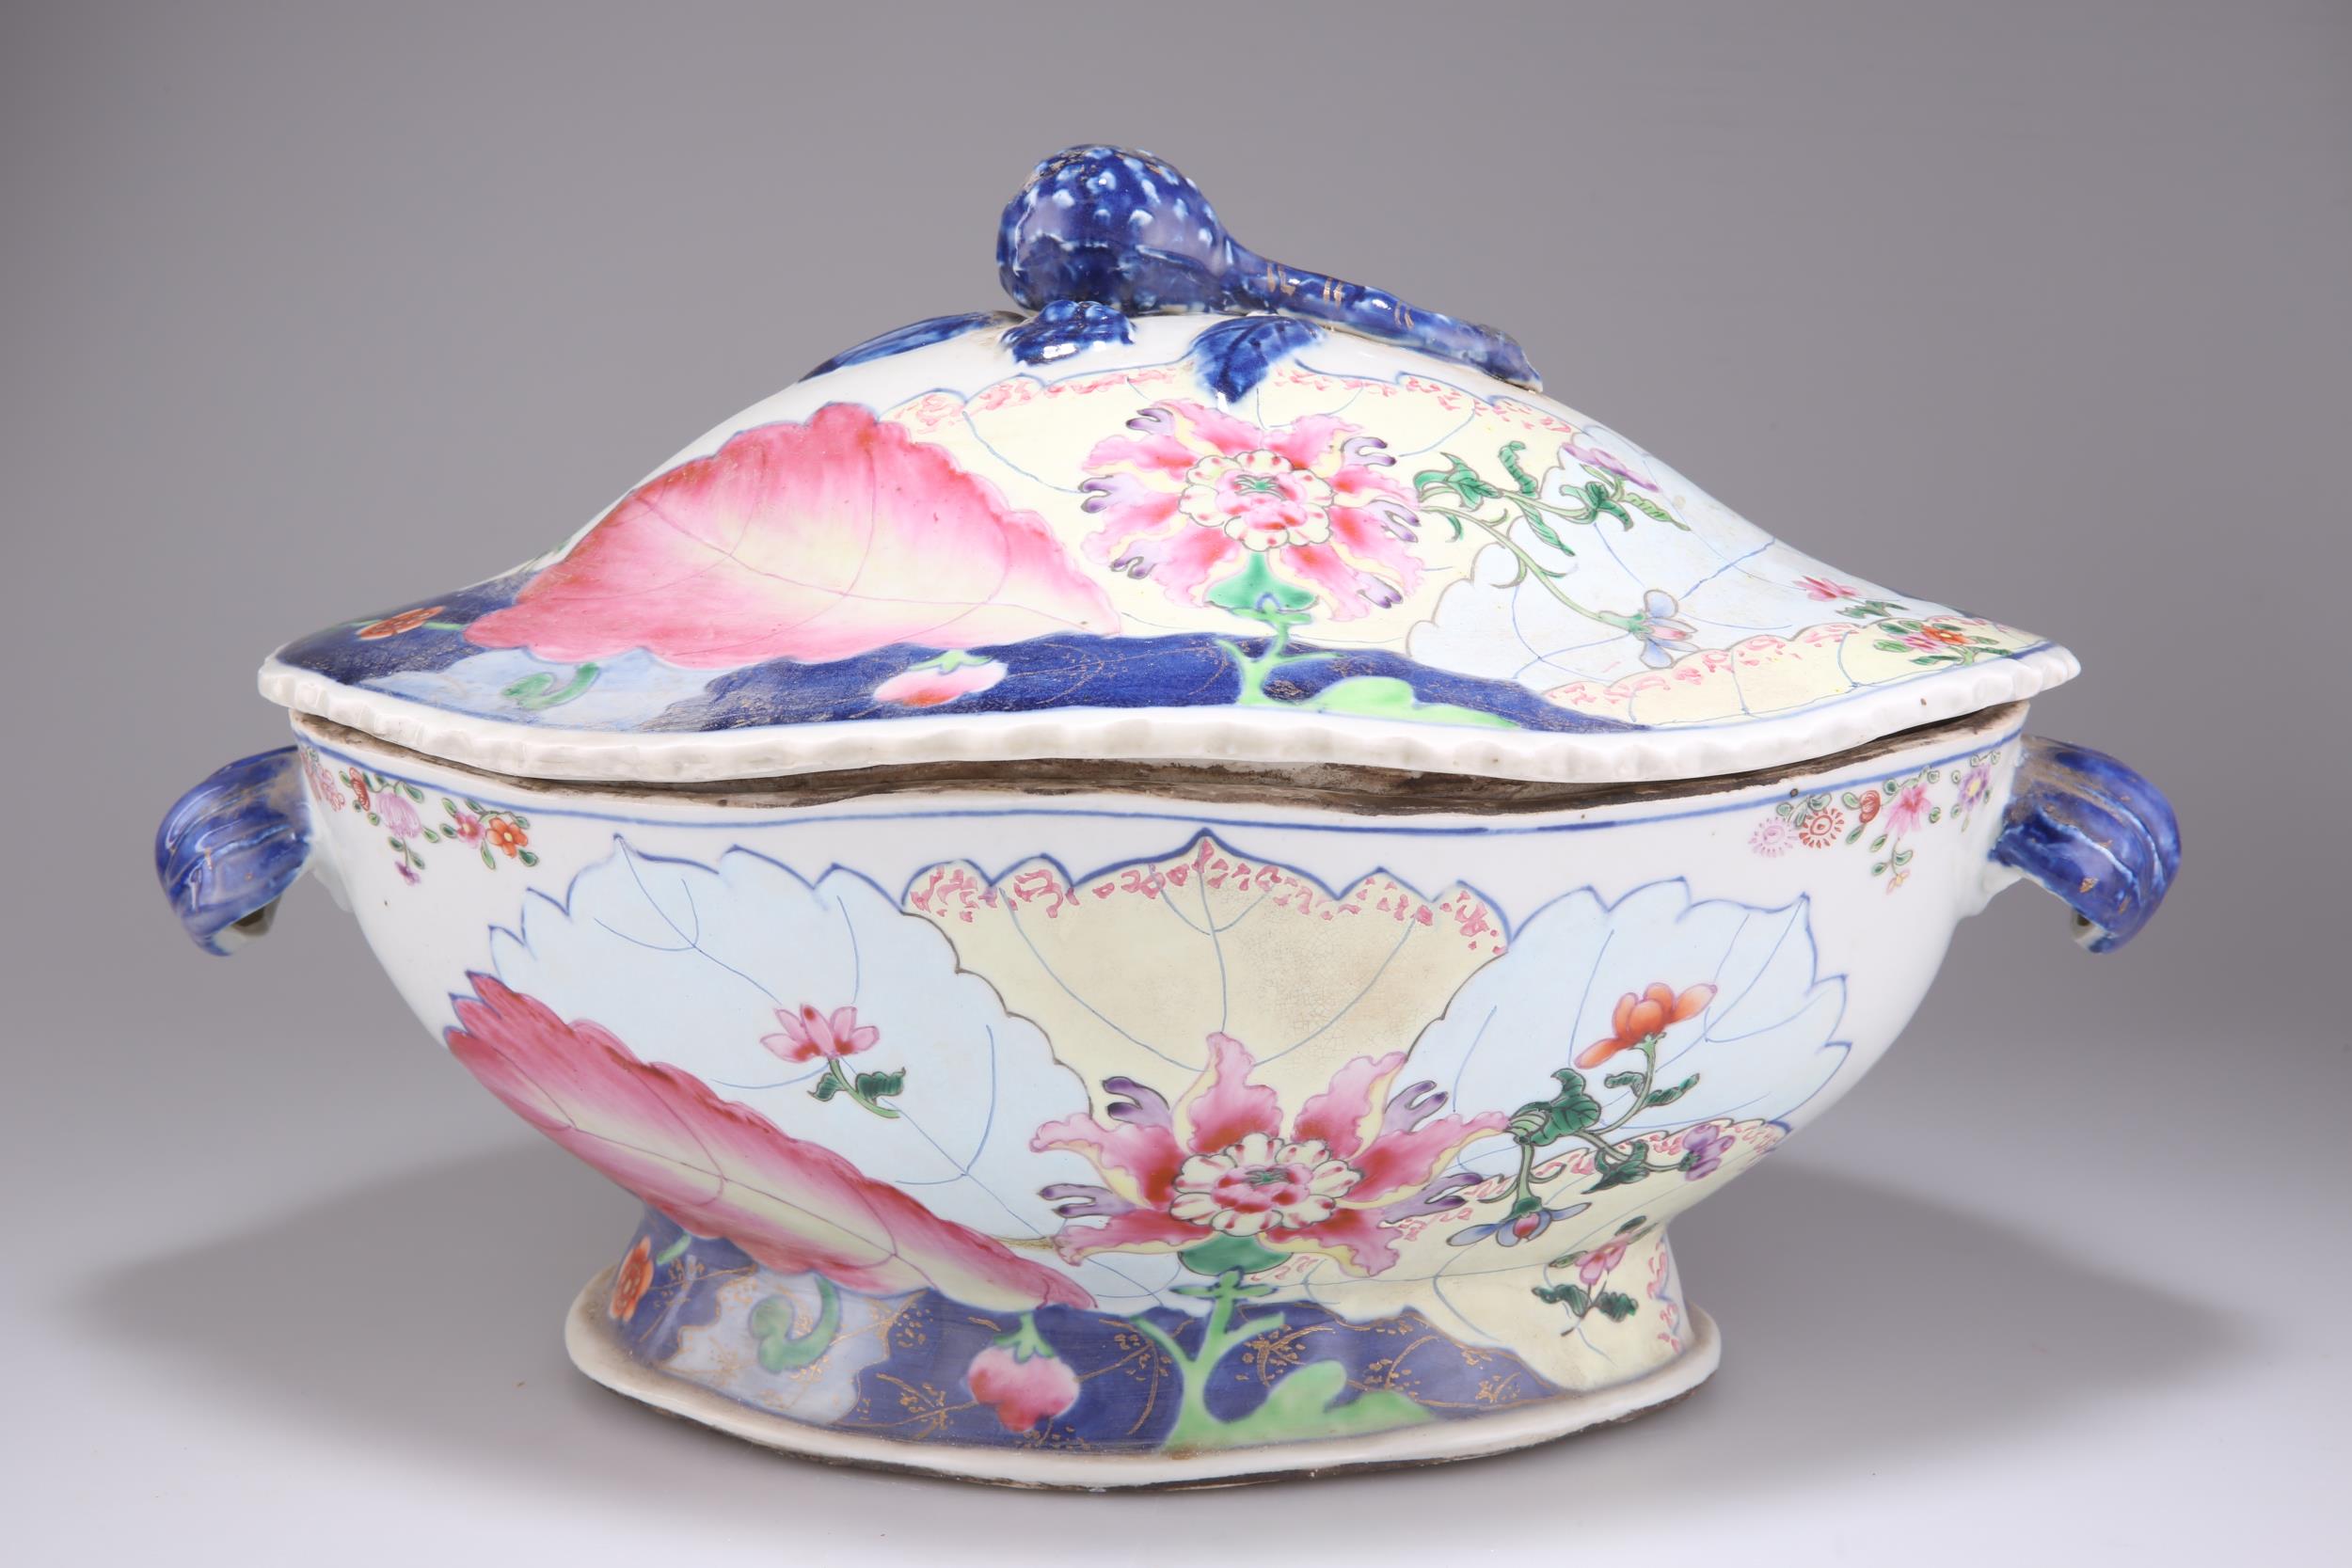 A TOBACCO LEAF TUREEN AND COVER, IN CHINESE EXPORT STYLE - Image 2 of 3